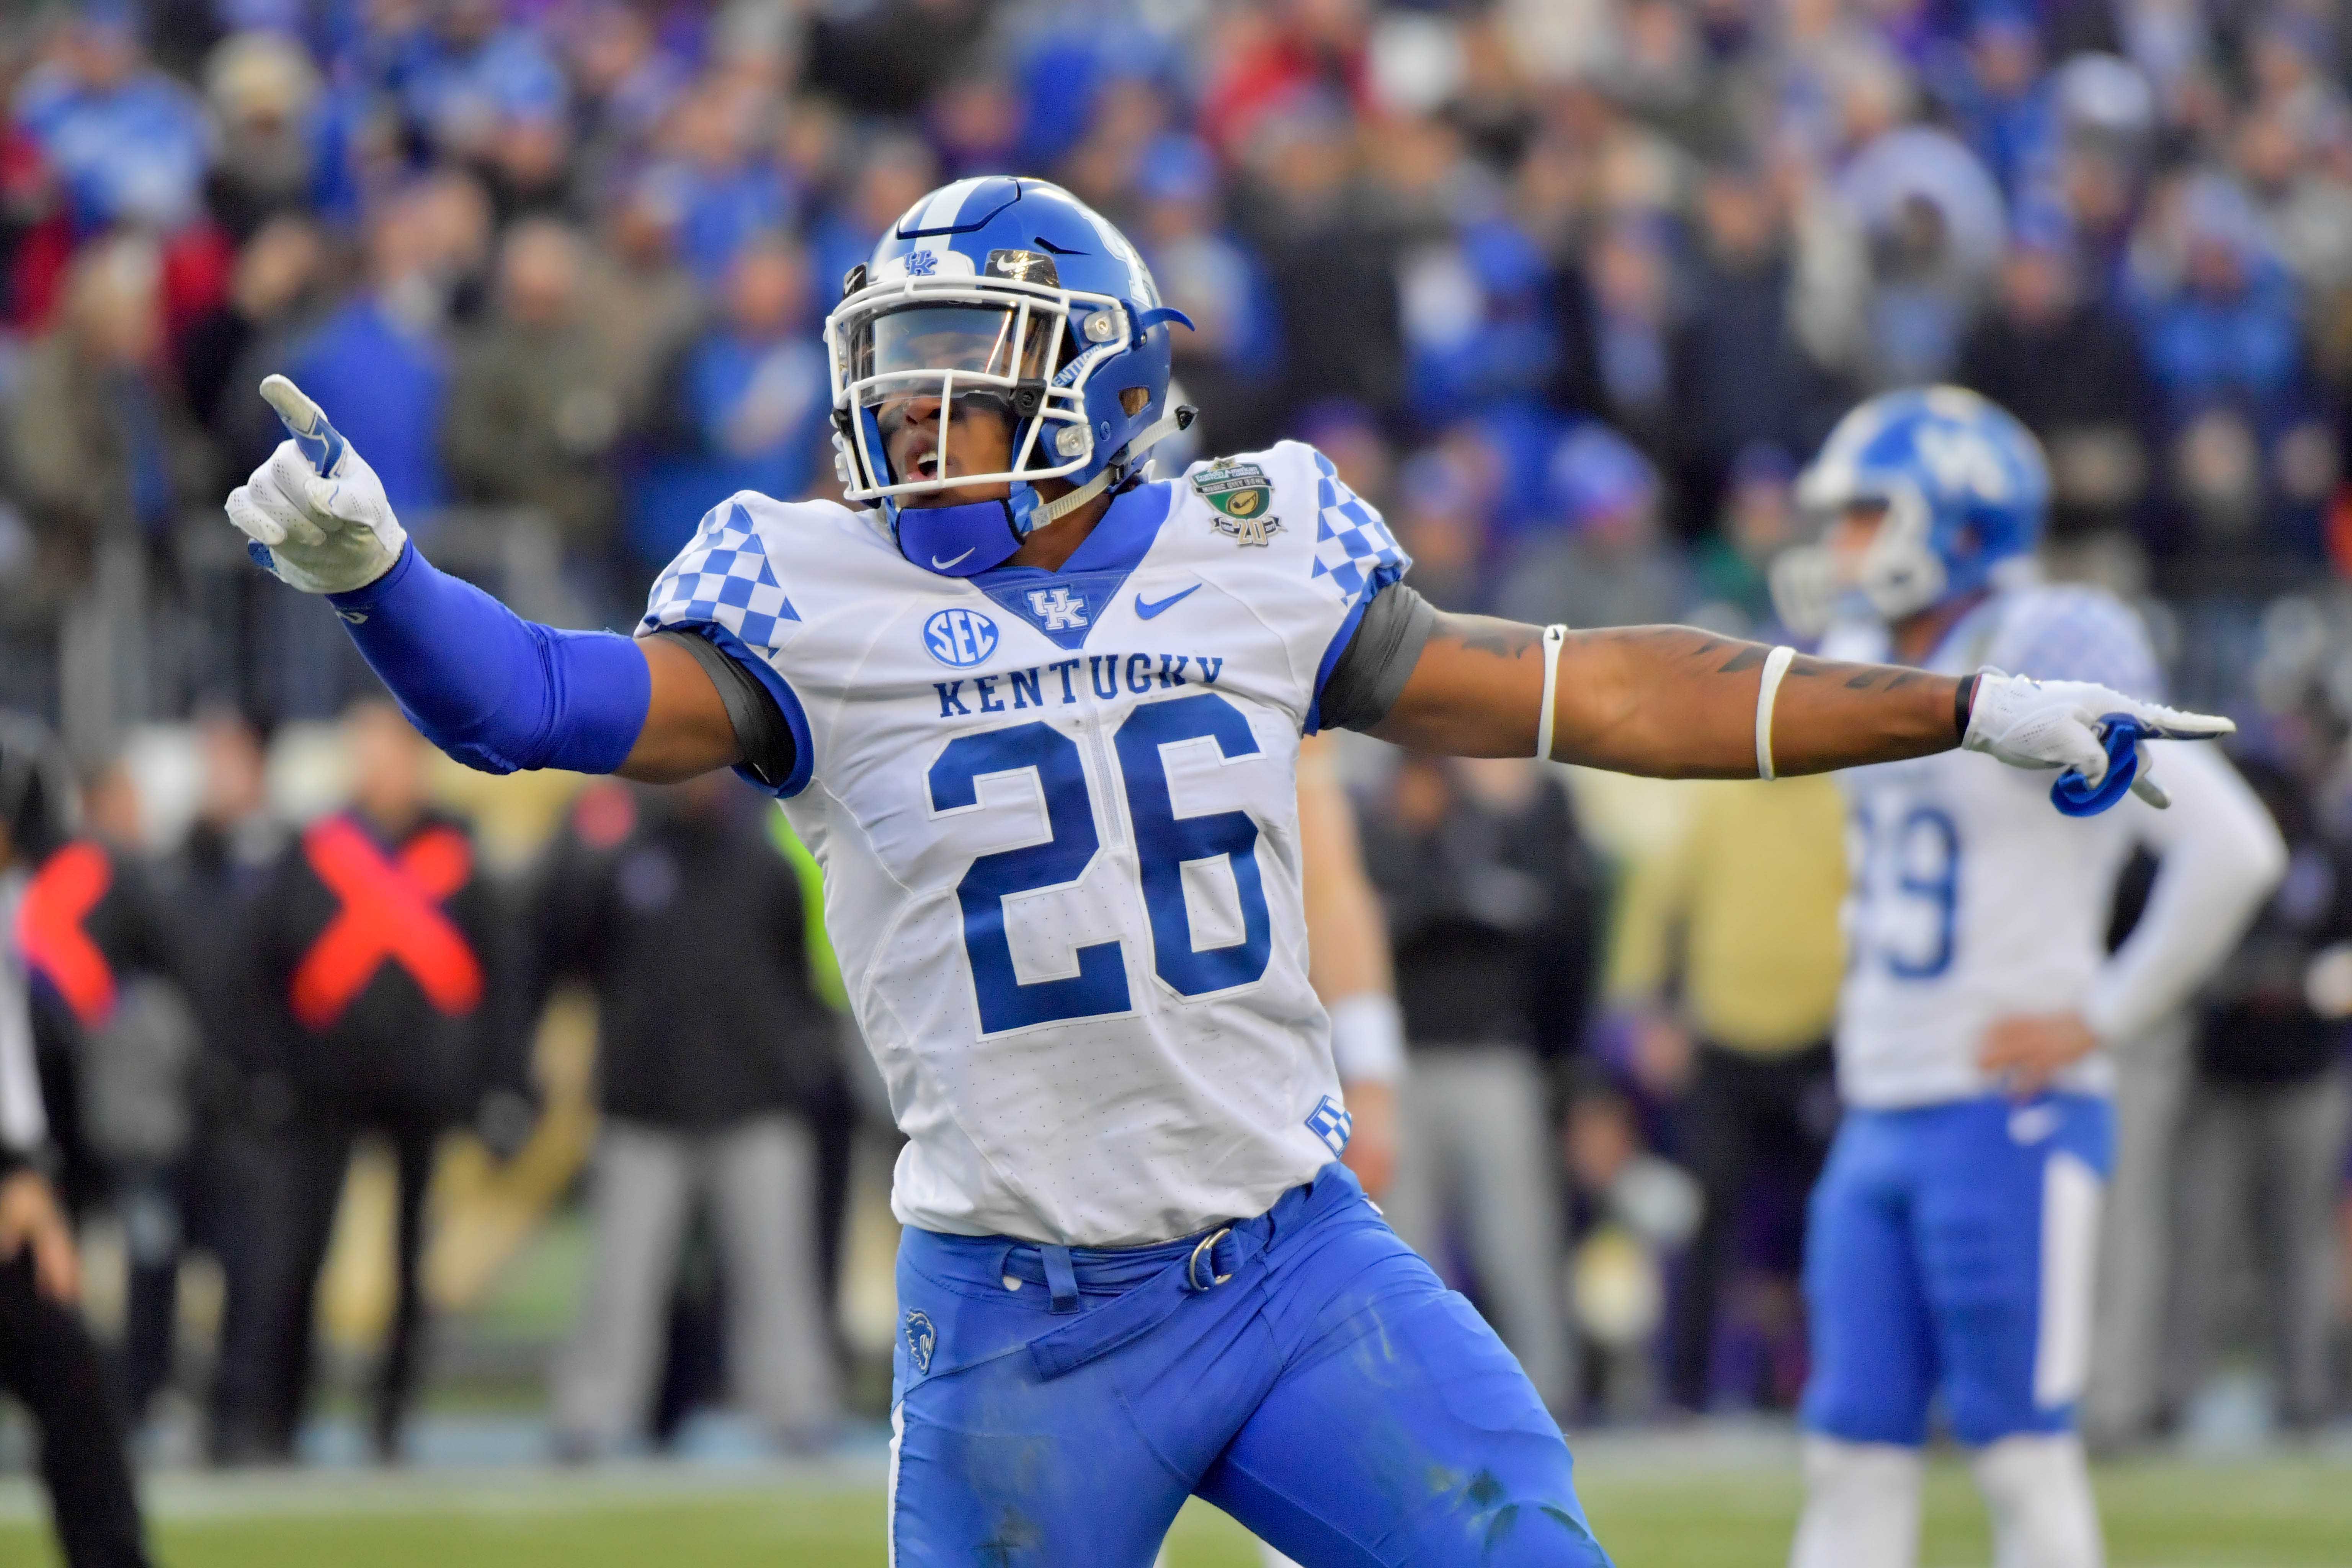 LOOK: Benny Snell custom cleats in Citrus Bowl offers nod to Elton